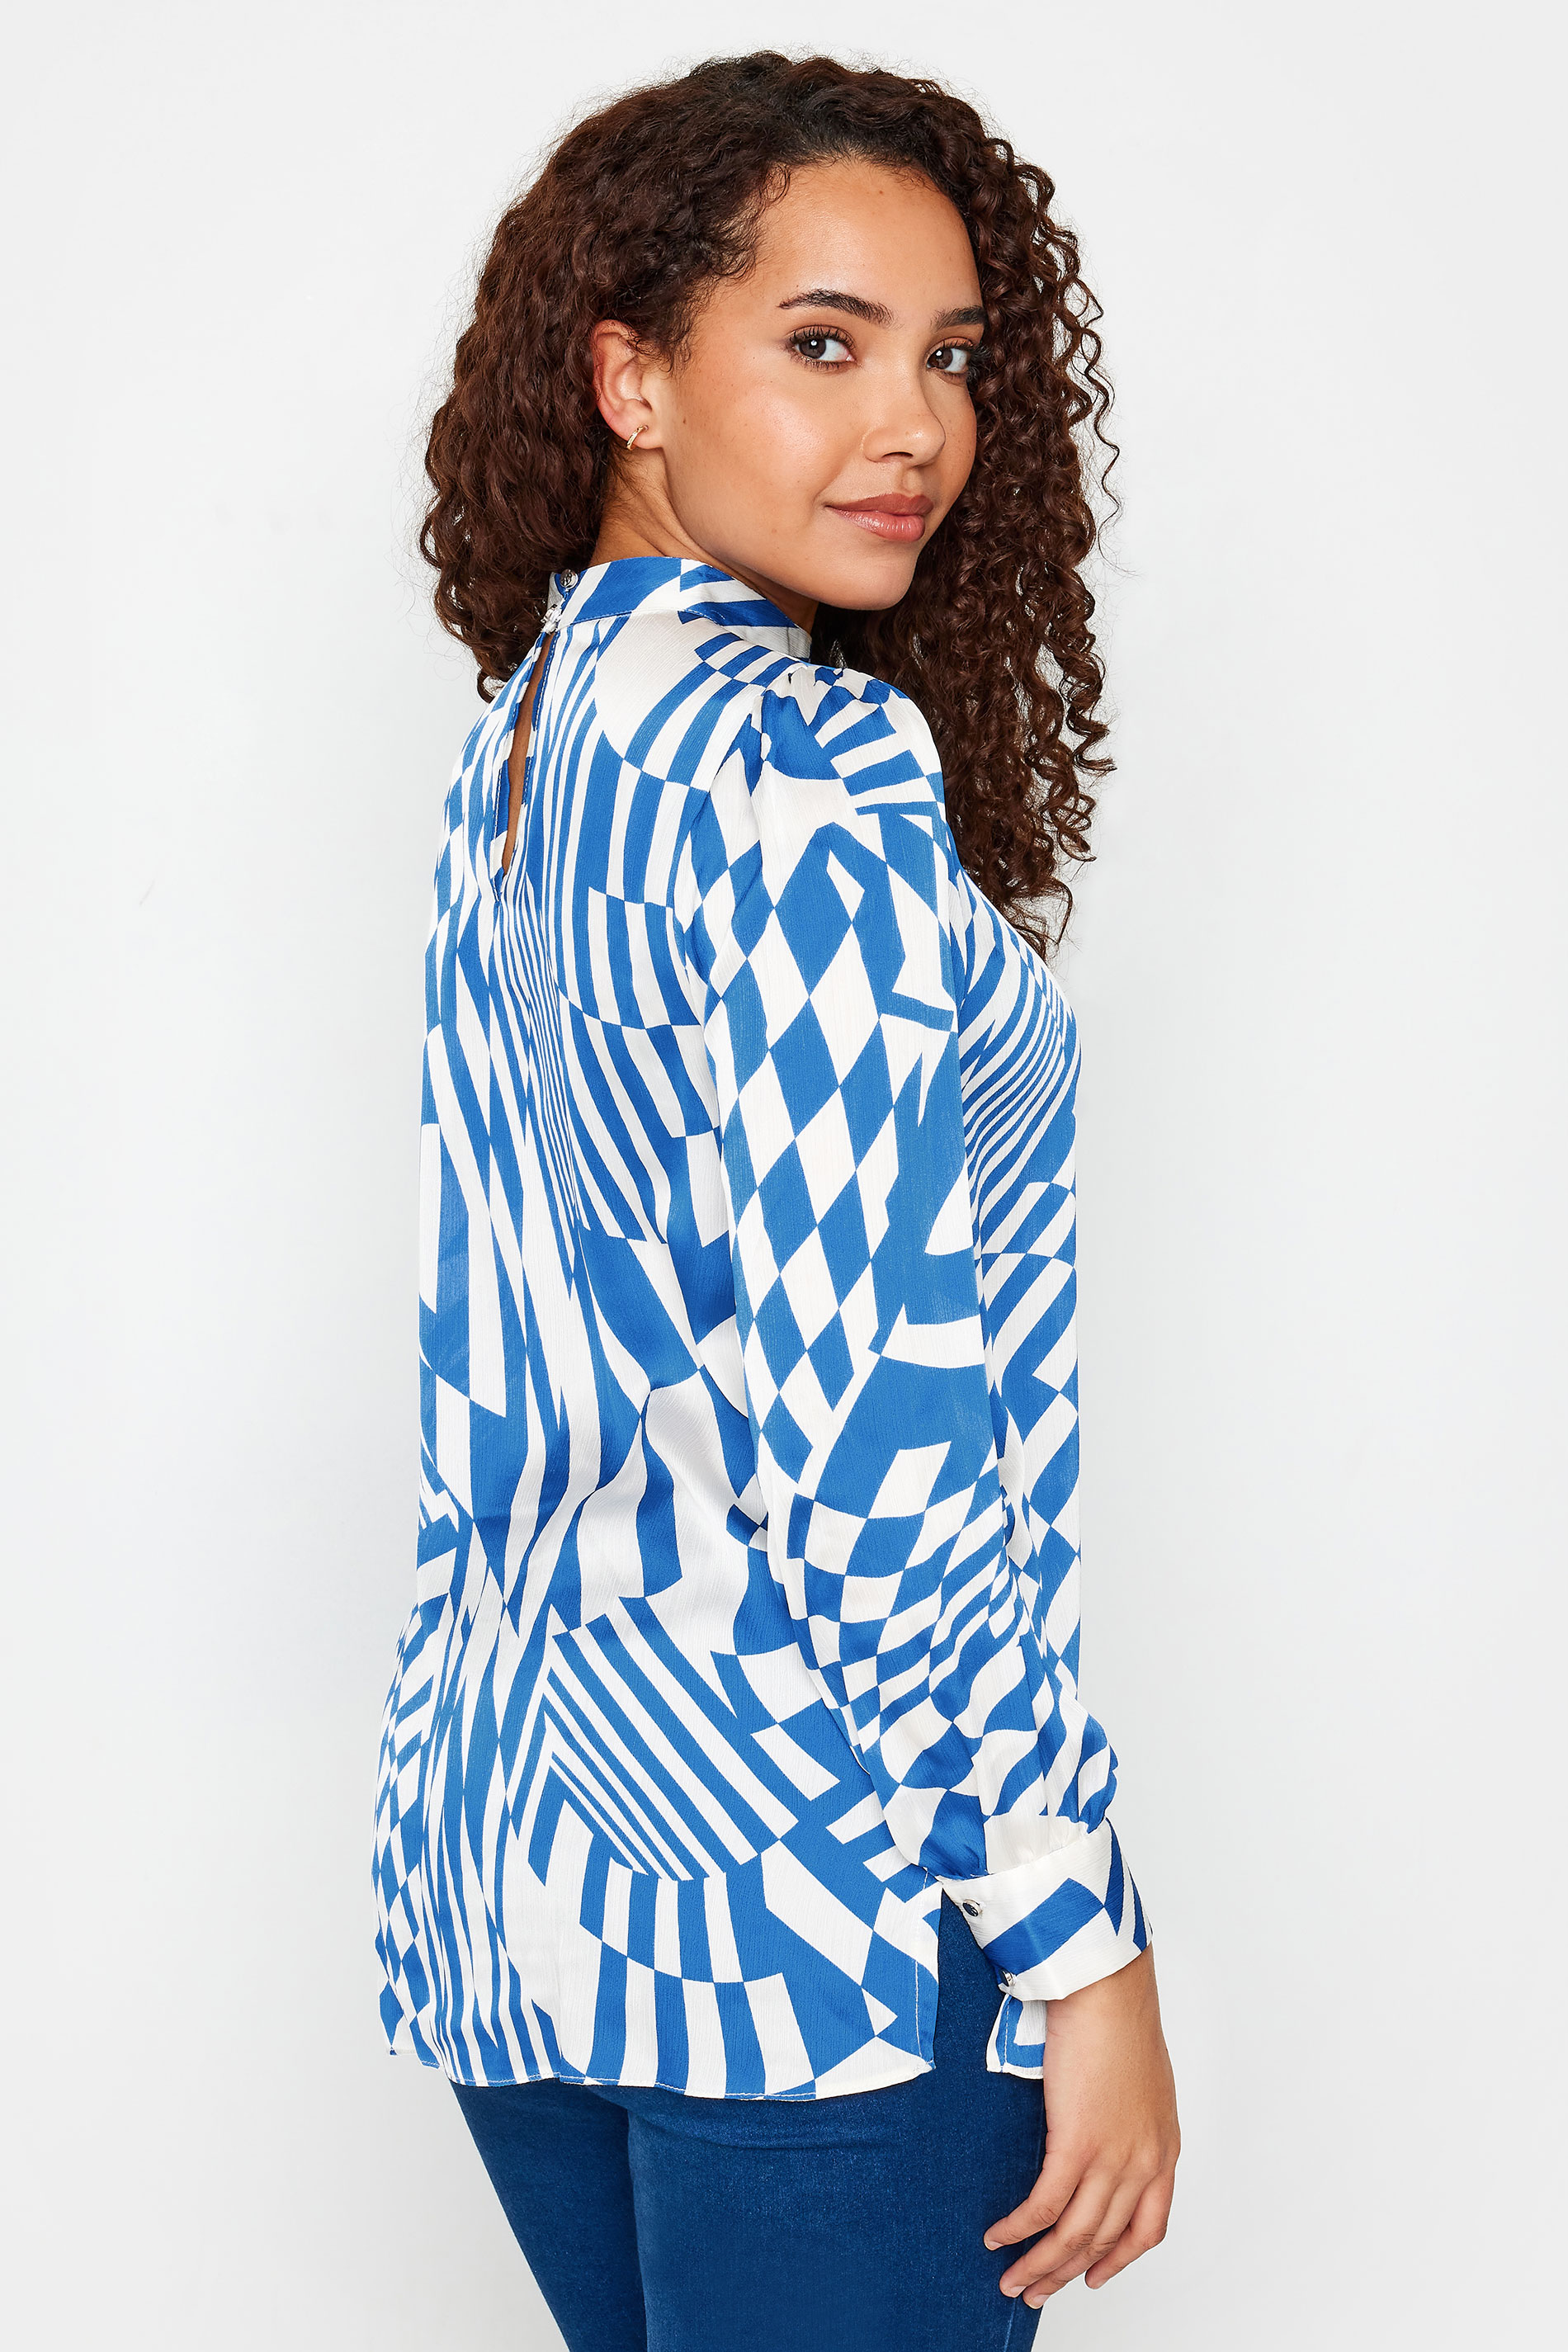 M&Co Blue Abstract Print High Neck Satin Blouse | M&Co 3